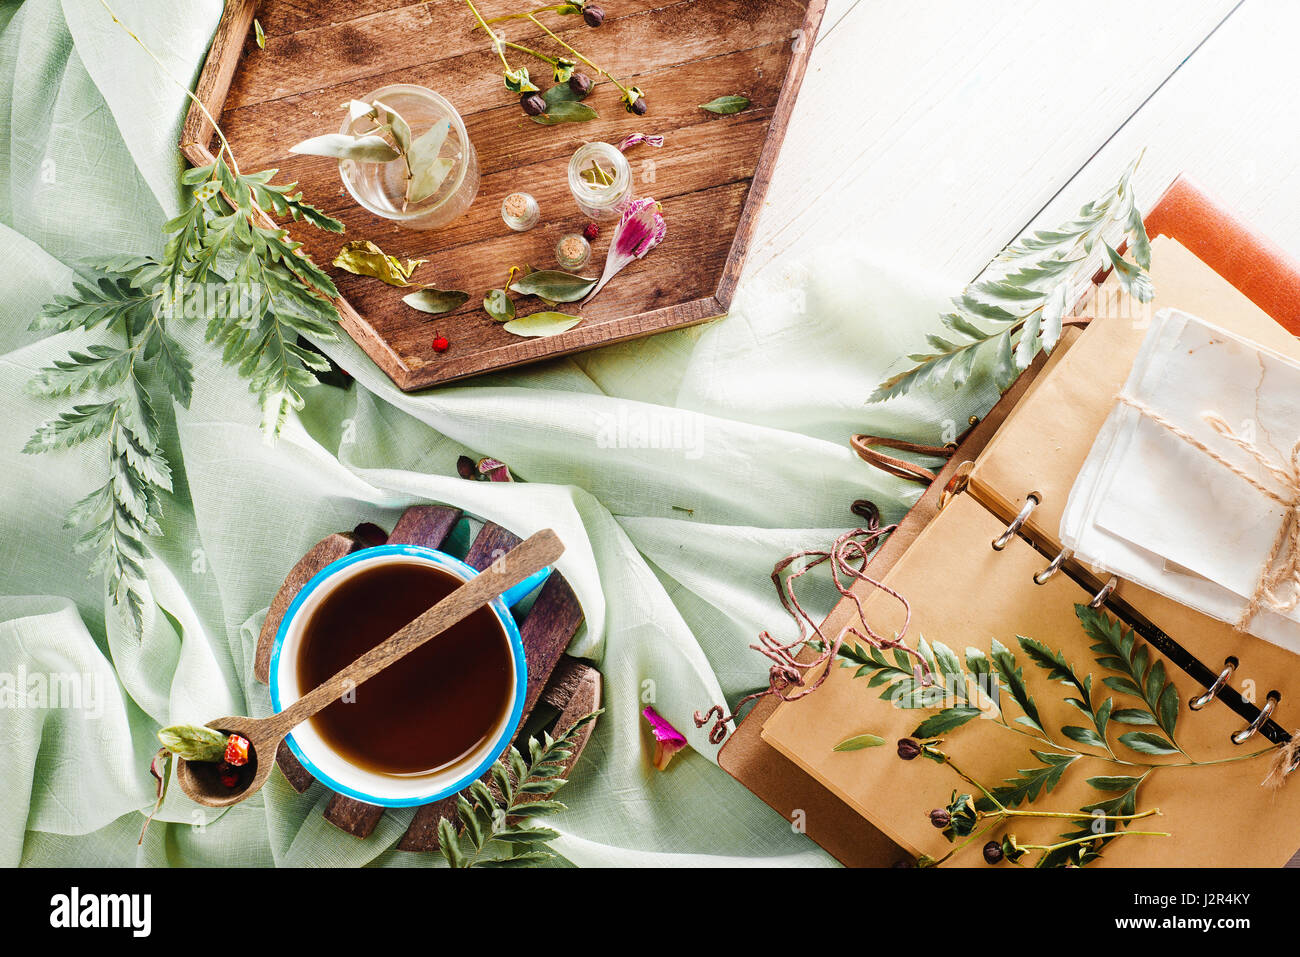 Nature flat lay with teacup, petals, herbs and ferns Stock Photo